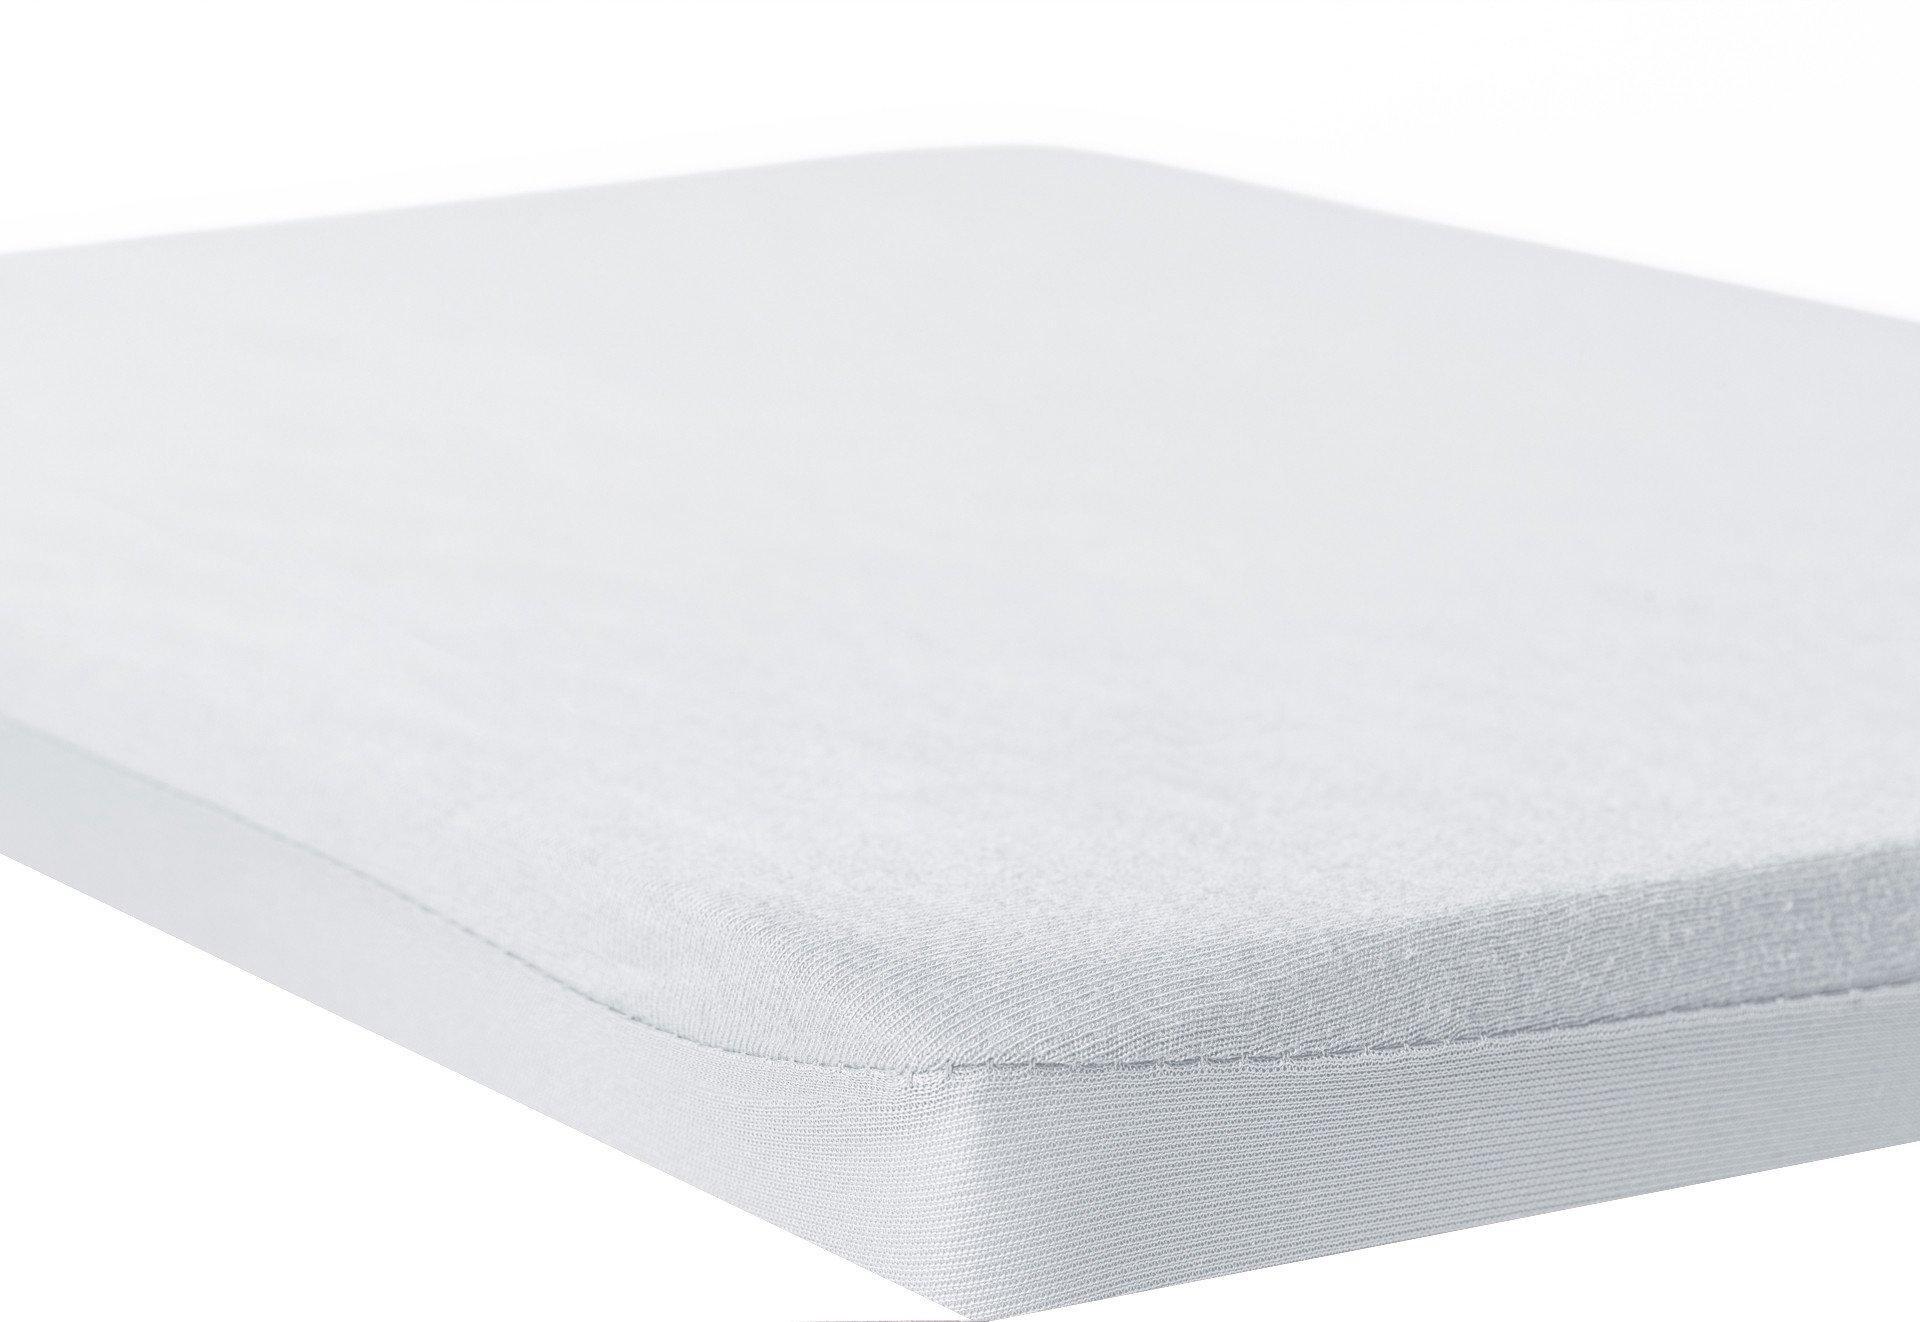 Nordbaby 2in1 fitted sheet 60x120cm, White - Nordbaby